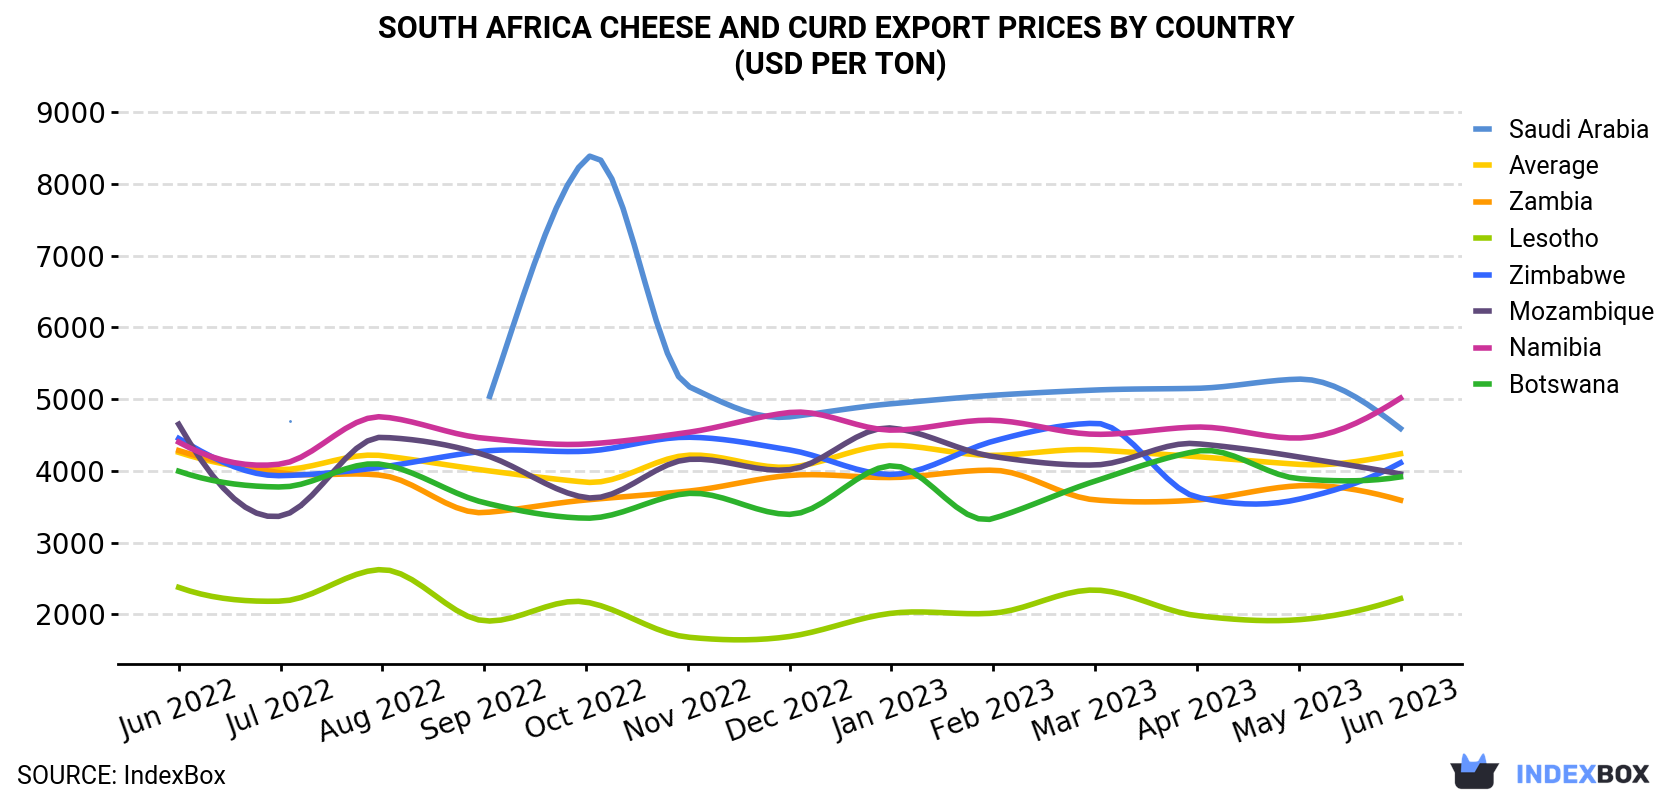 South Africa Cheese And Curd Export Prices By Country (USD Per Ton)